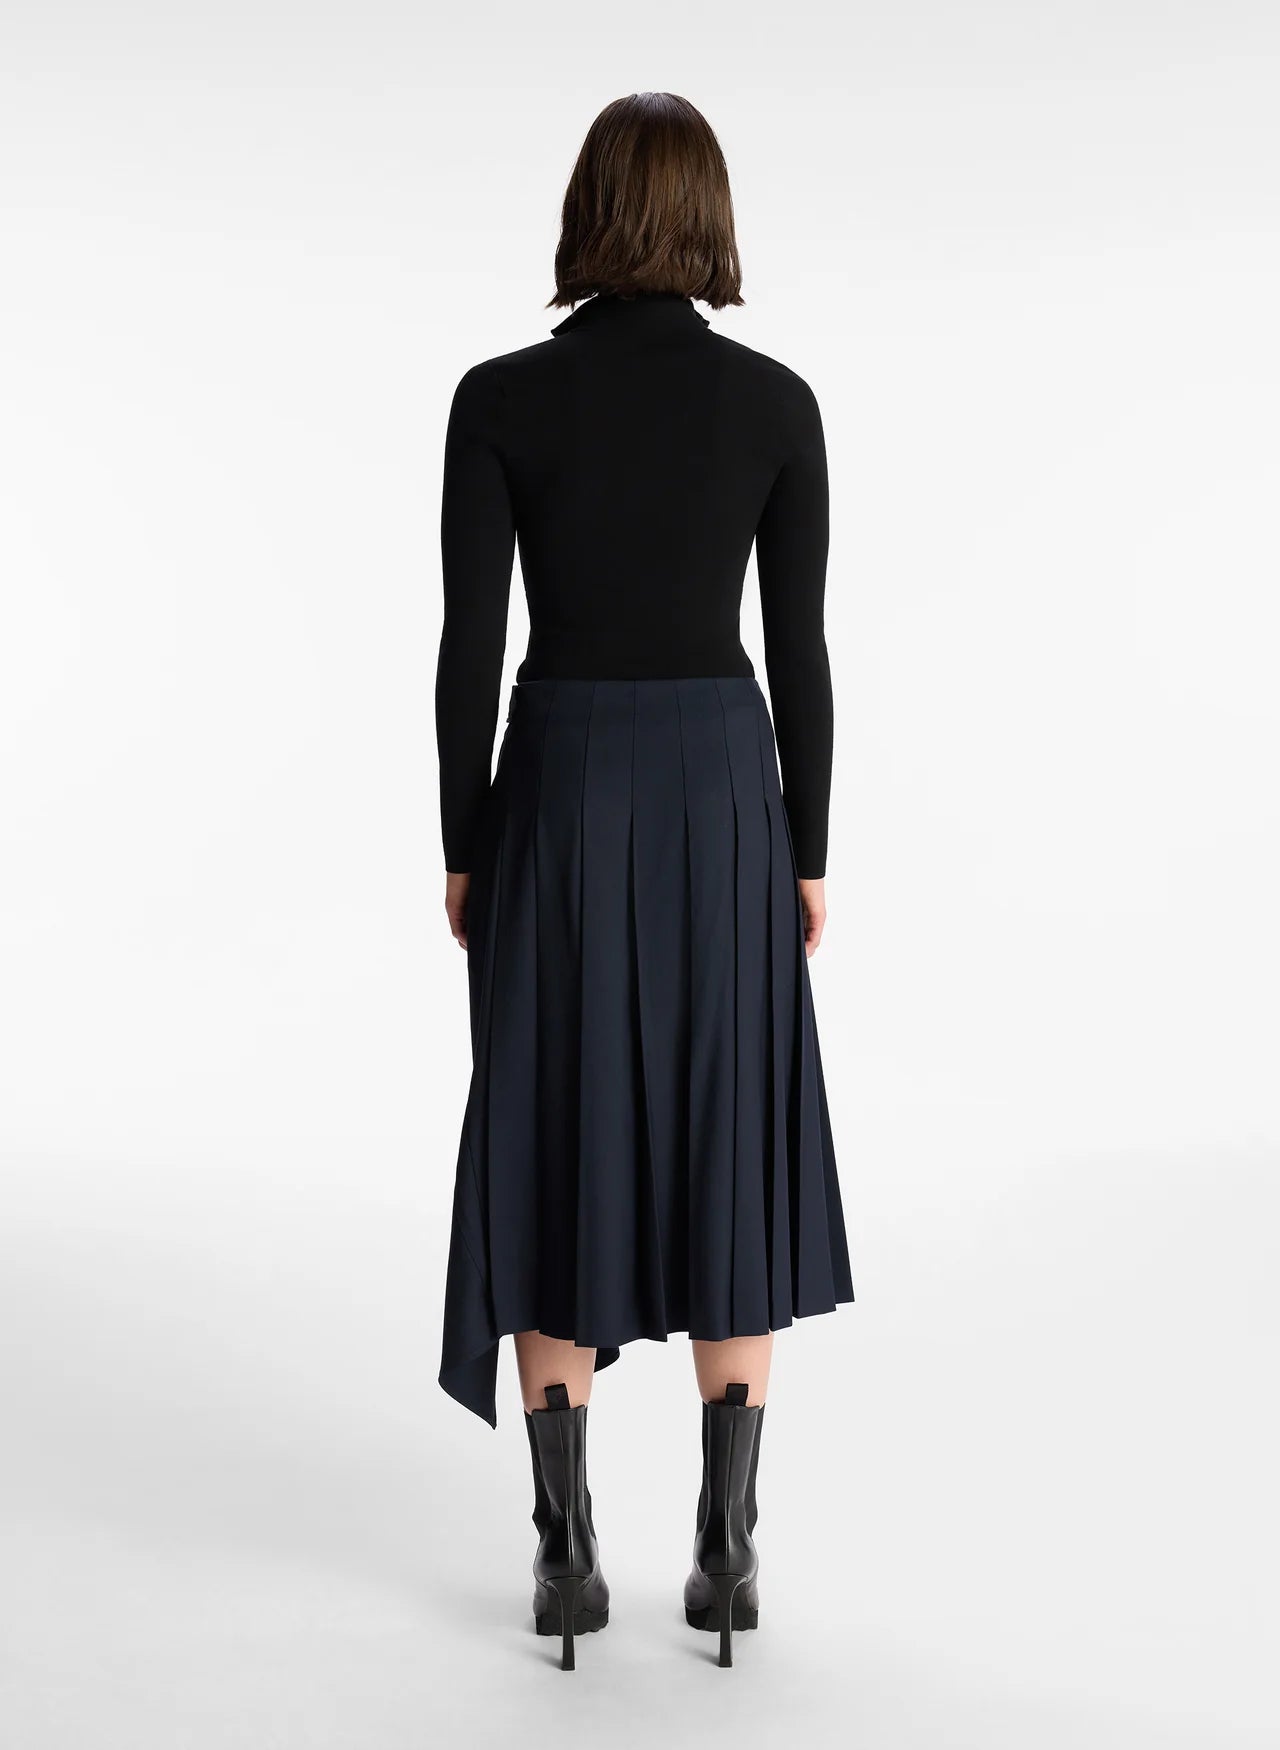 A.L.C. Wayland Skirt in Navy